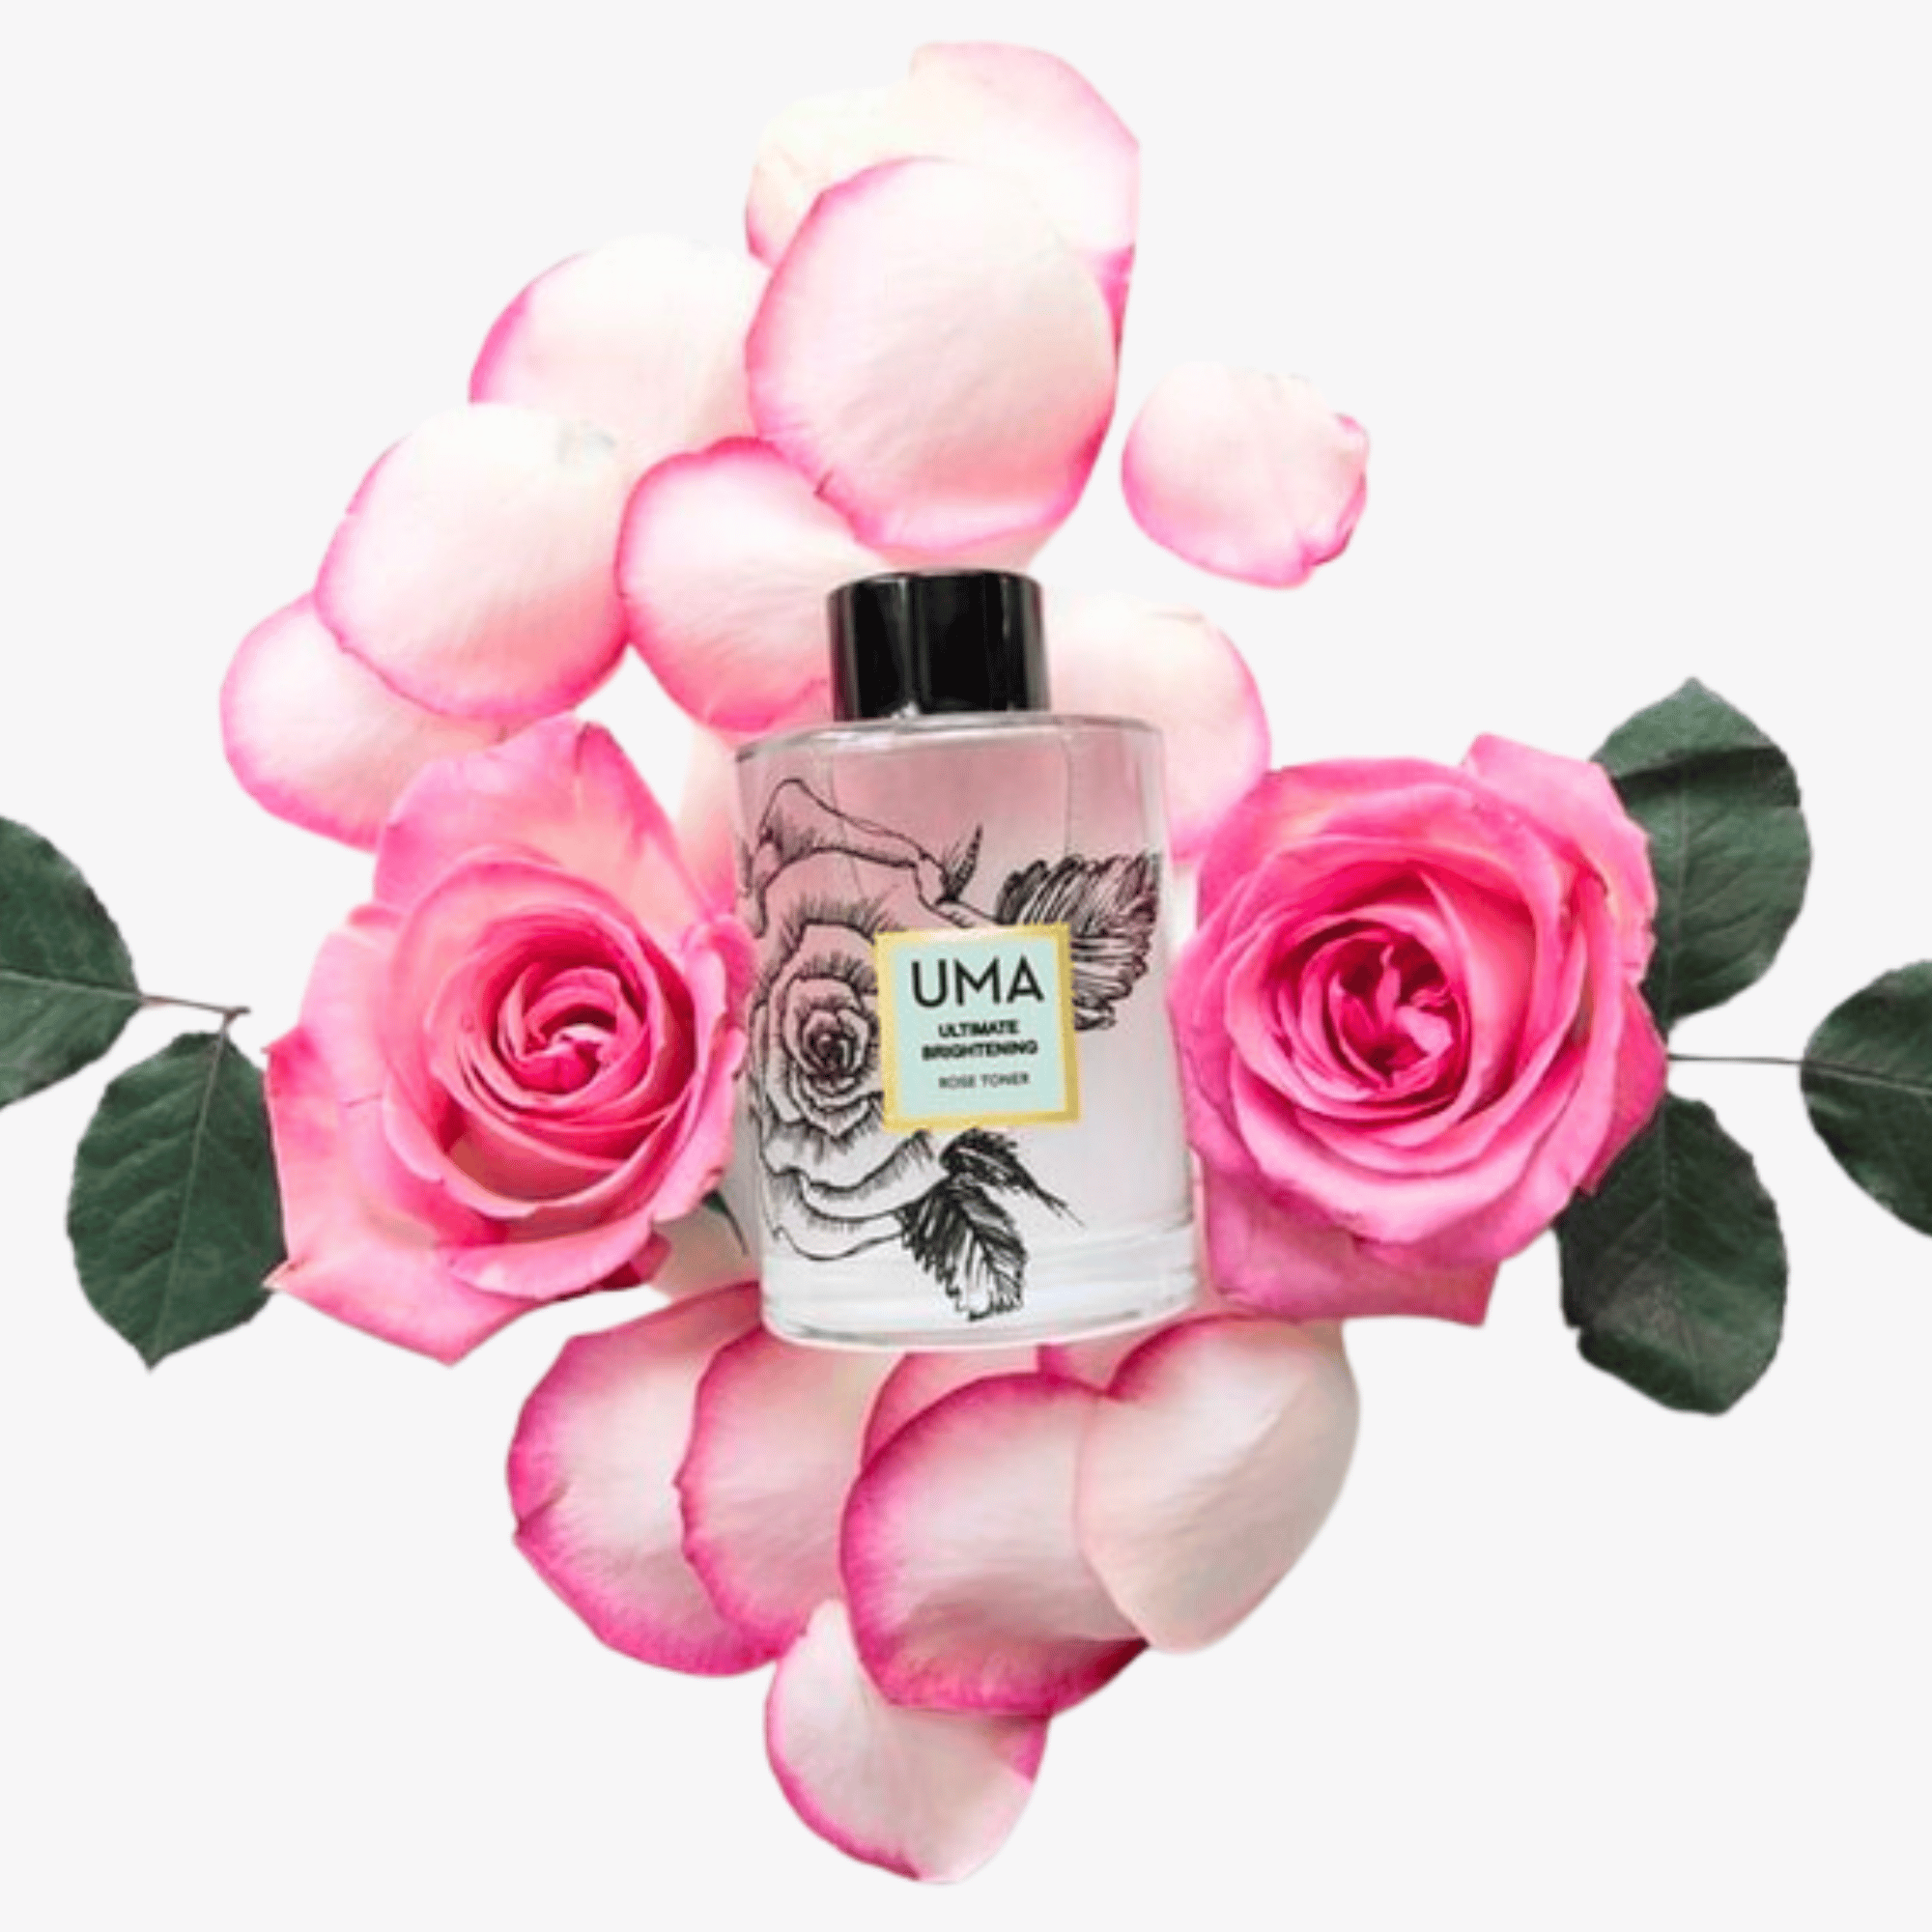 uma rose toner with roses on home page